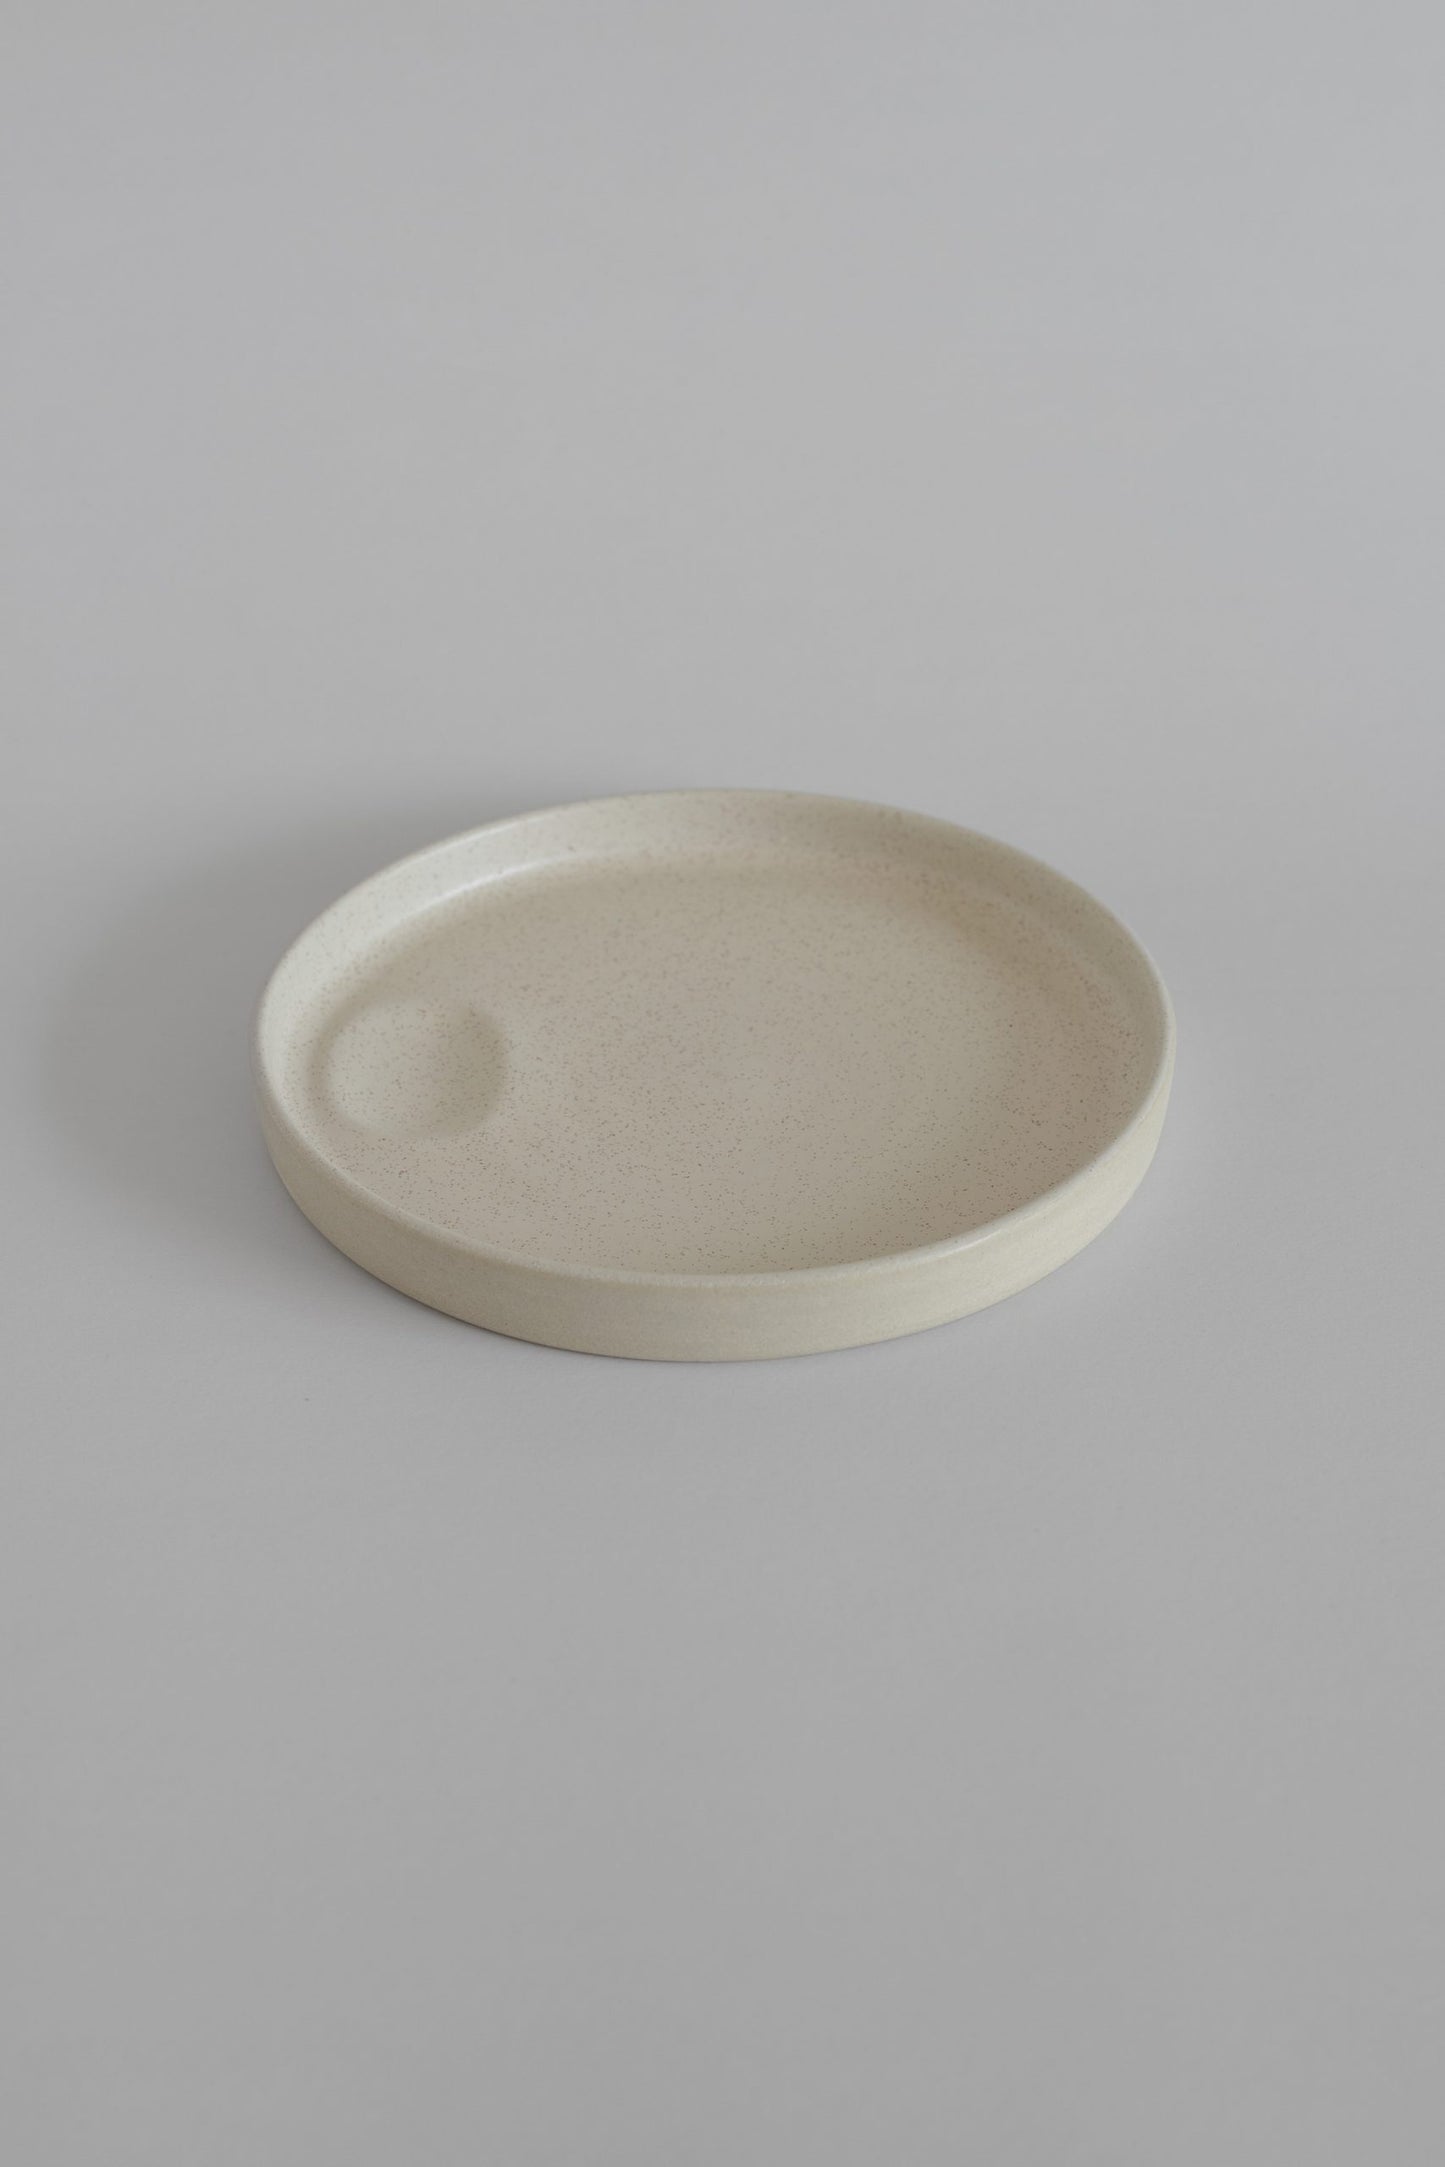 Ceramic Plate Cream 20 cm - Pack 2 | Plates | Iberica - Pretty things from Portugal